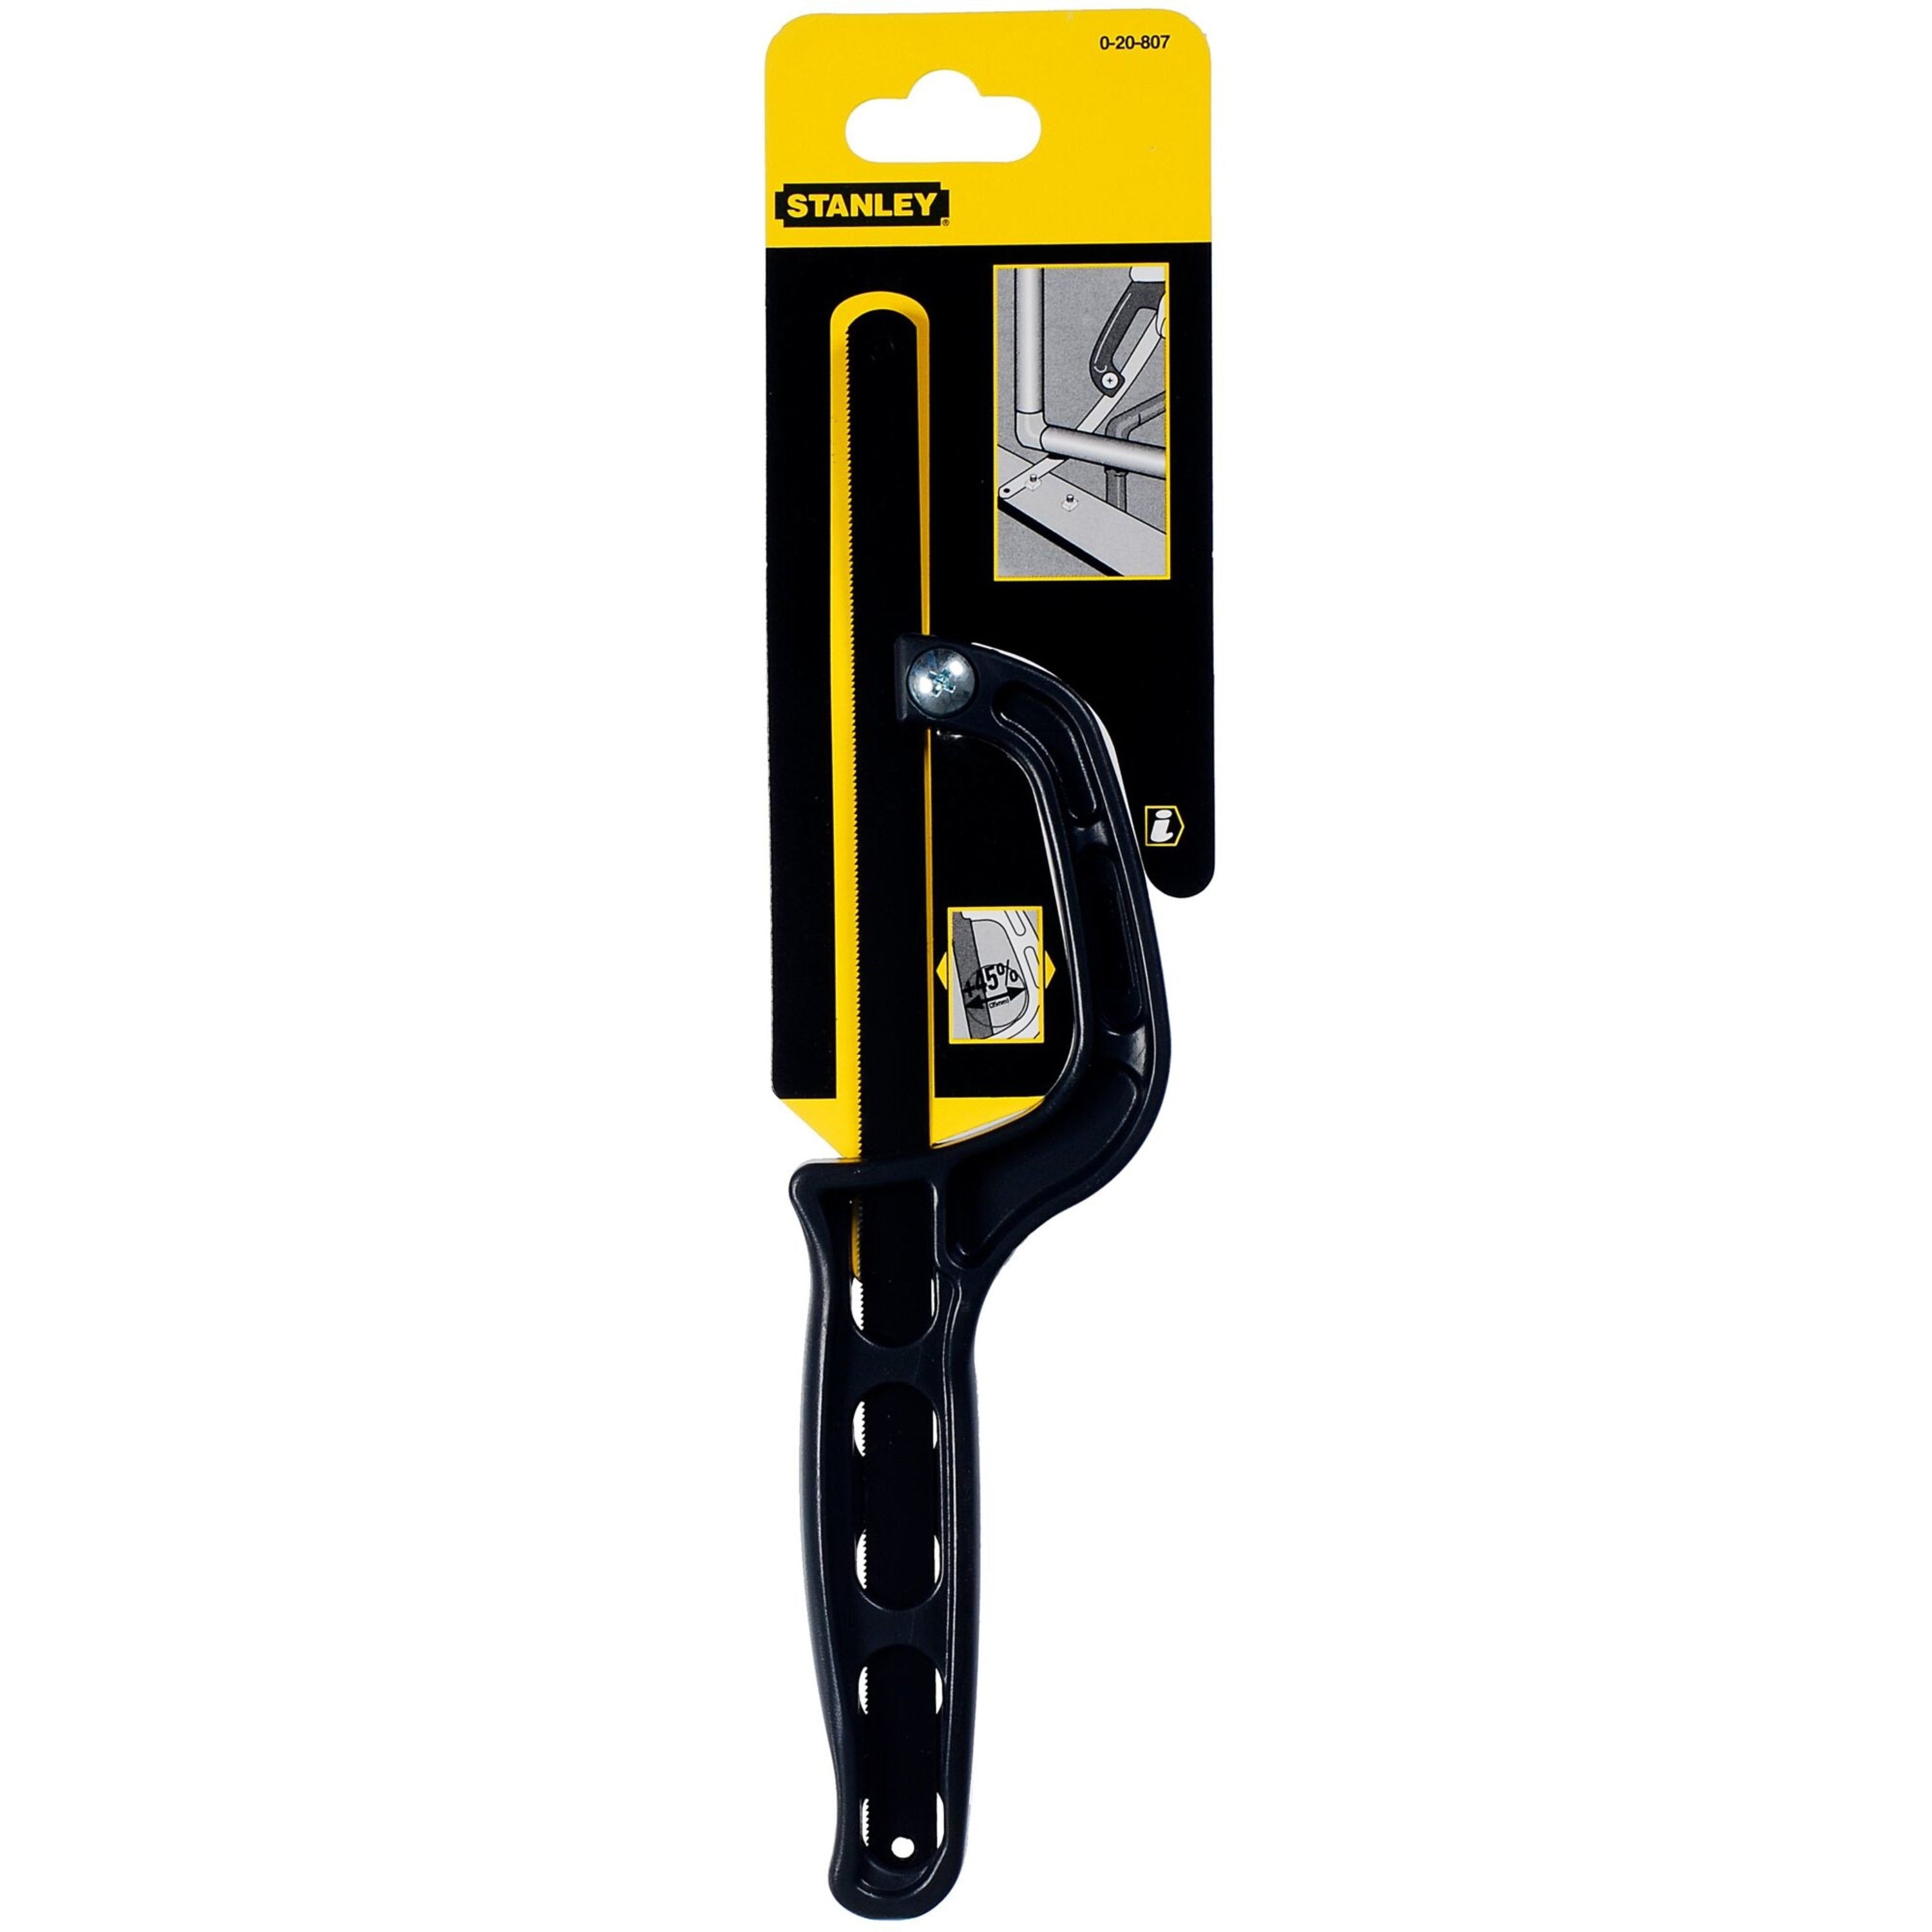 Stanley Mini Hacksaw 0-20-807 Power Tool Services